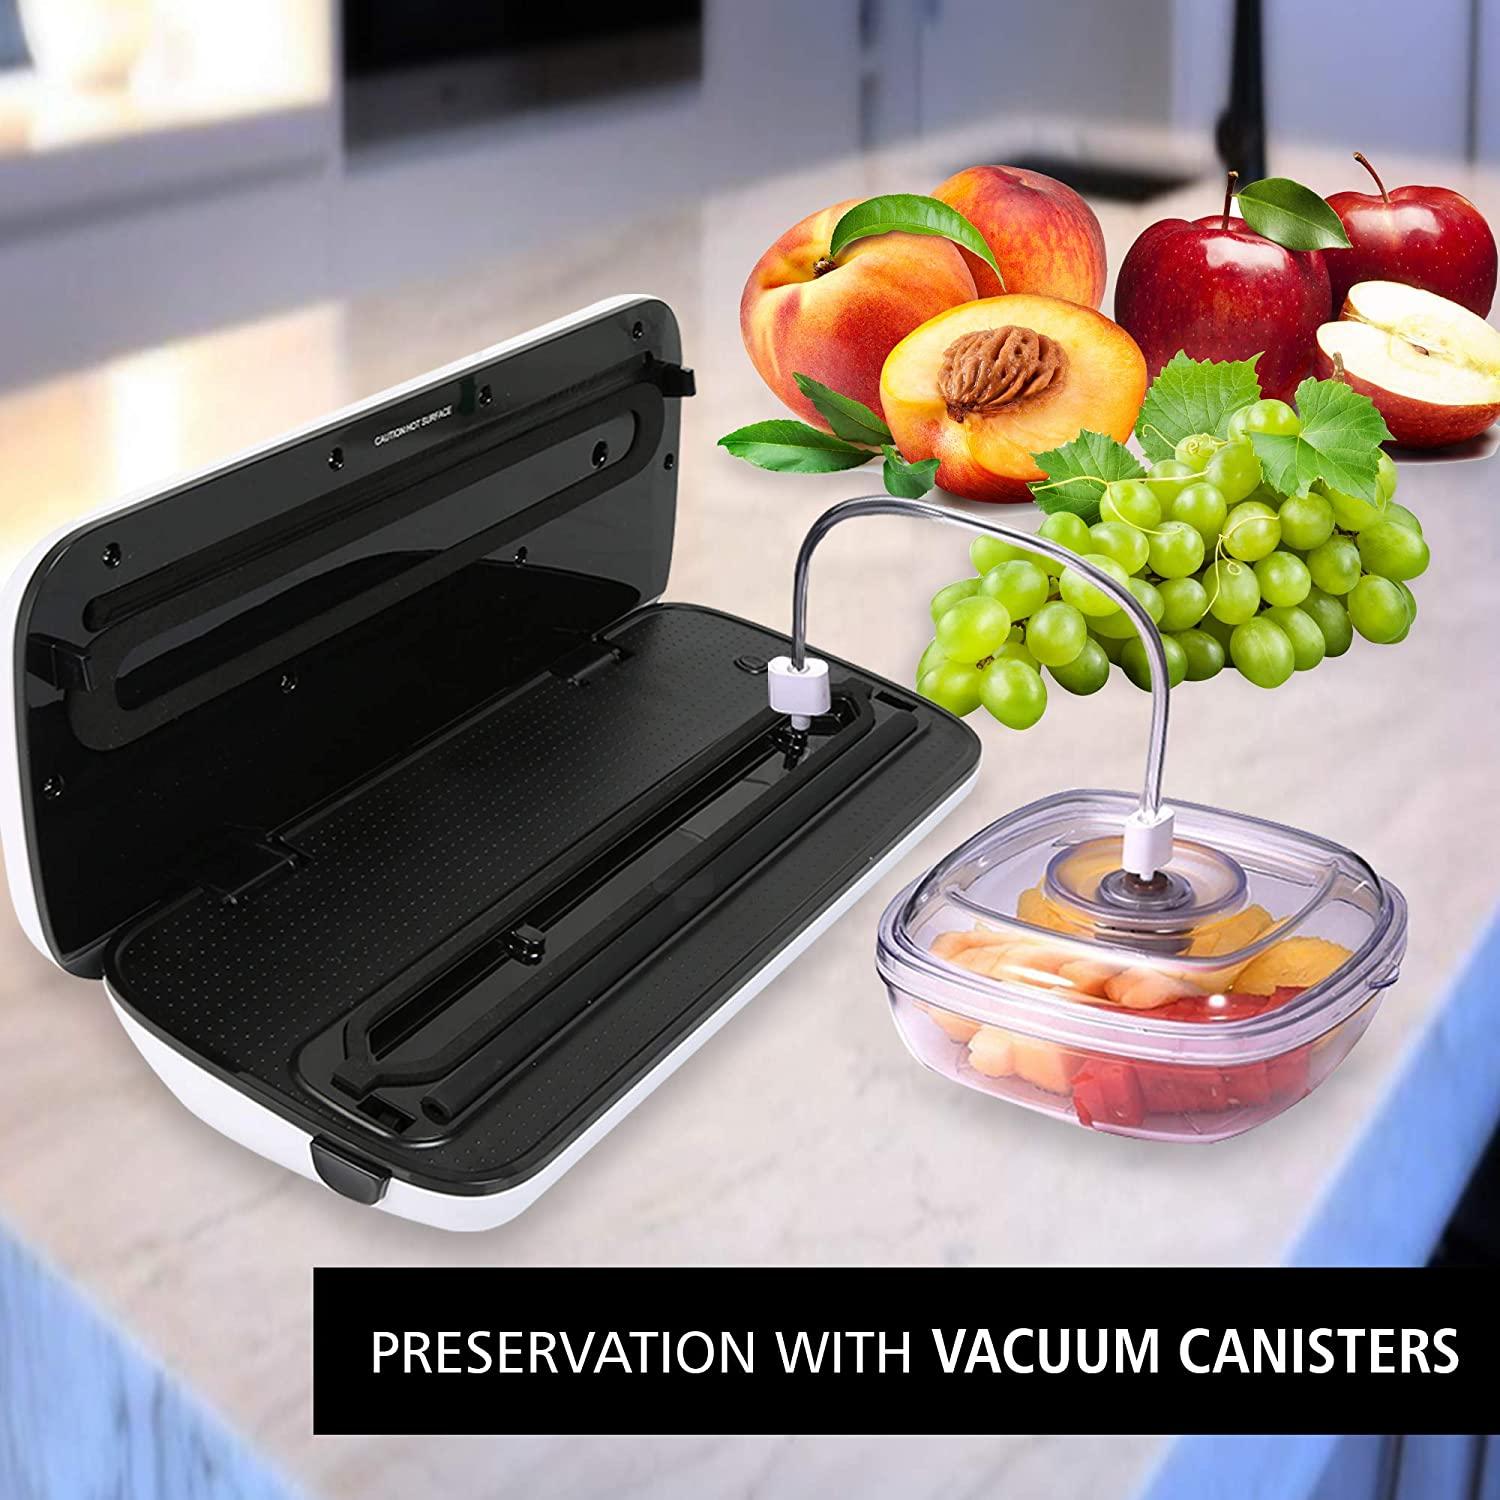 NutriChef PKVS Sealer, Automatic Vacuum Air Sealing System Preservation  w/Starter Kit, Compact Design, Lab Tested, Dry & Moist Food Modes